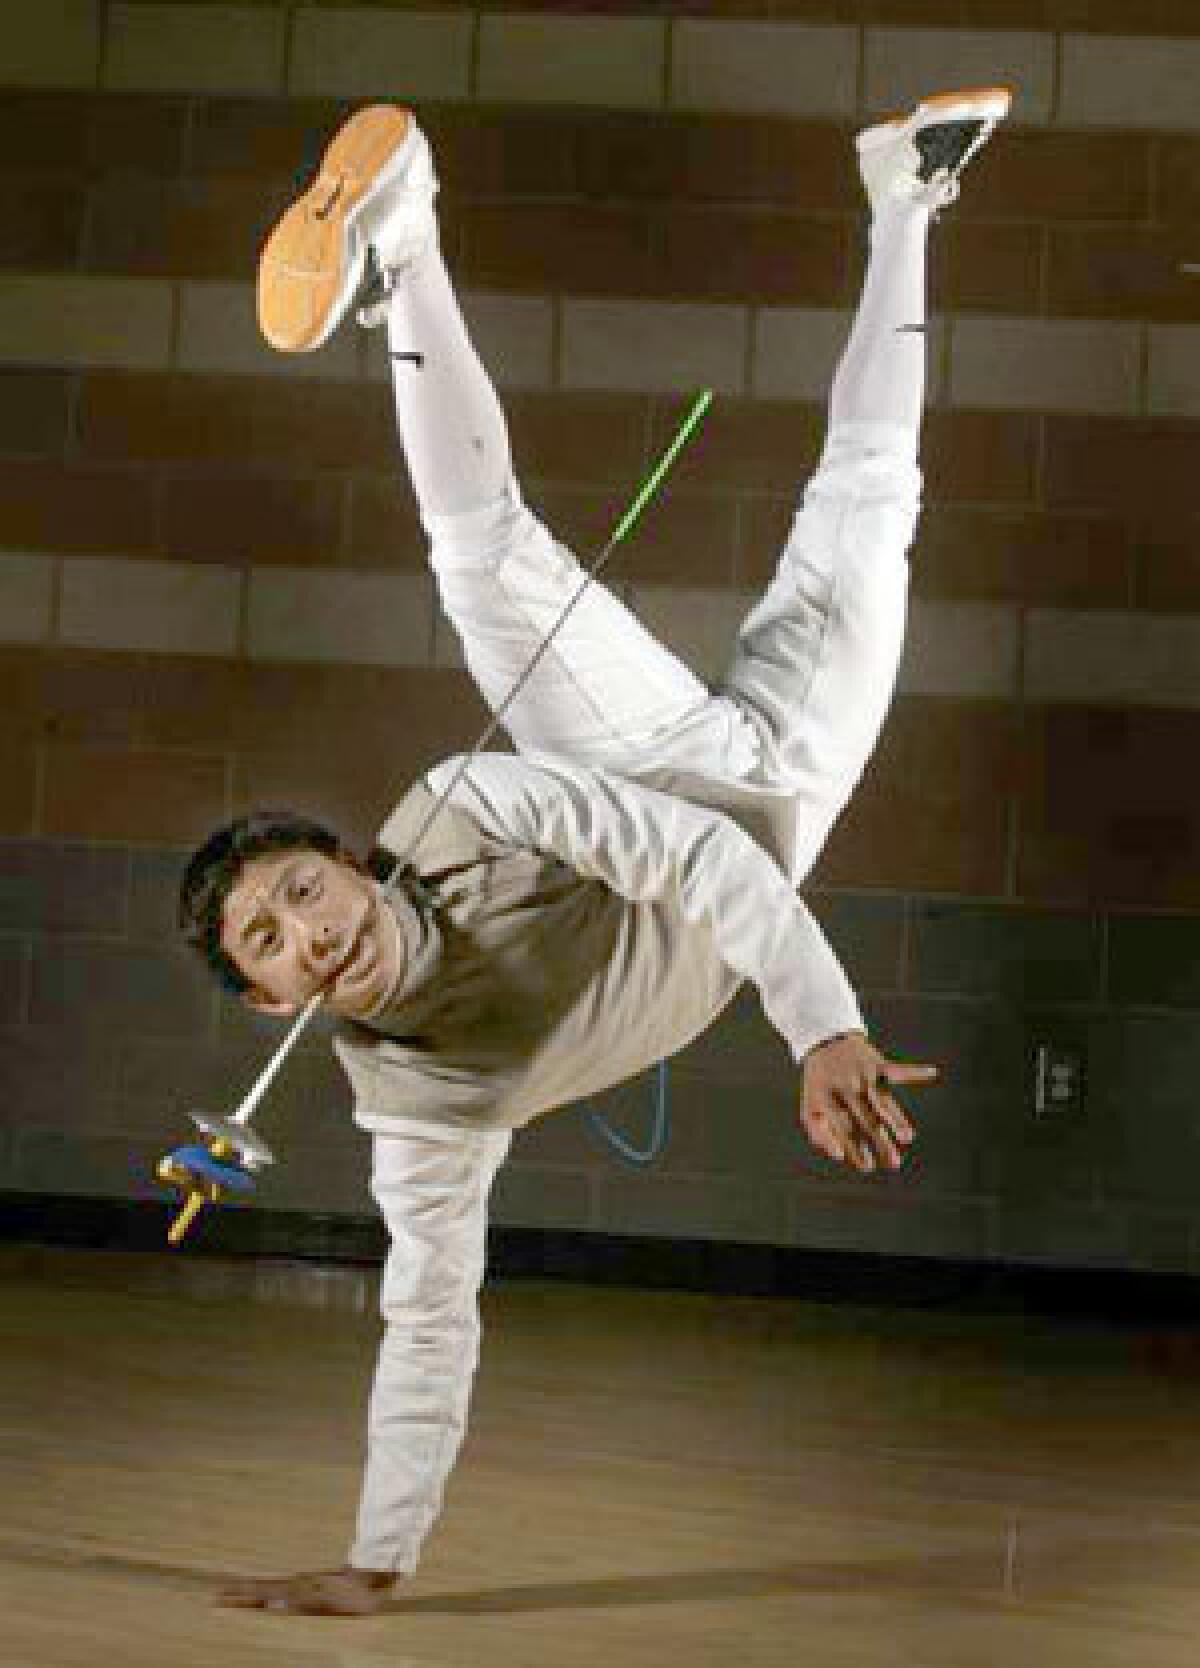 Brennan Louie, a junior at the L.A. Center for Enriched Studies, uses break dancing as part of his fencing training. He hopes to compete in the Olympics.